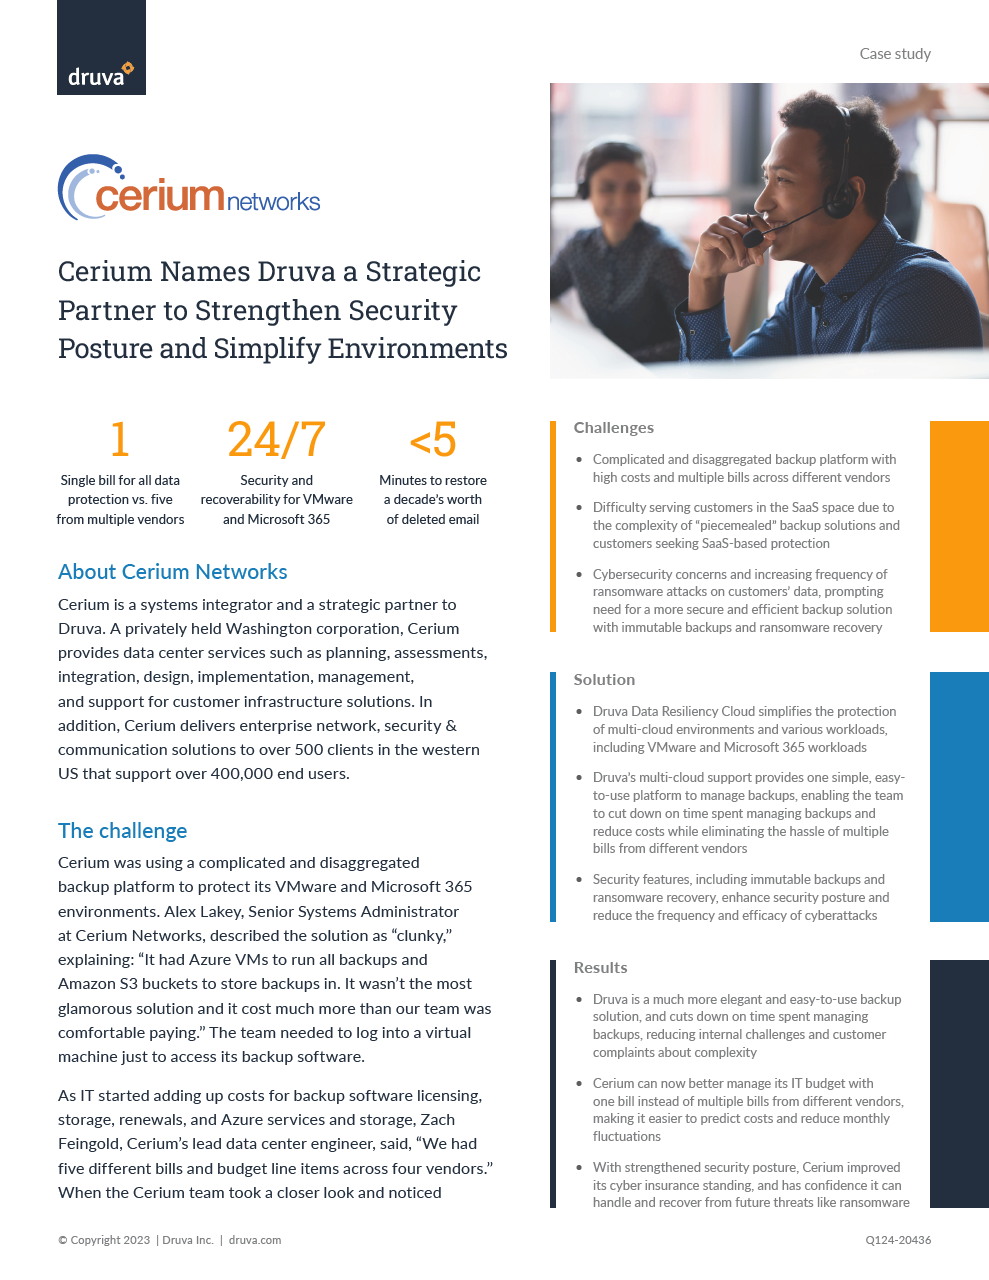 Cerium Names Druva a Strategic Partner to Strengthen Security Posture and Simplify Environments